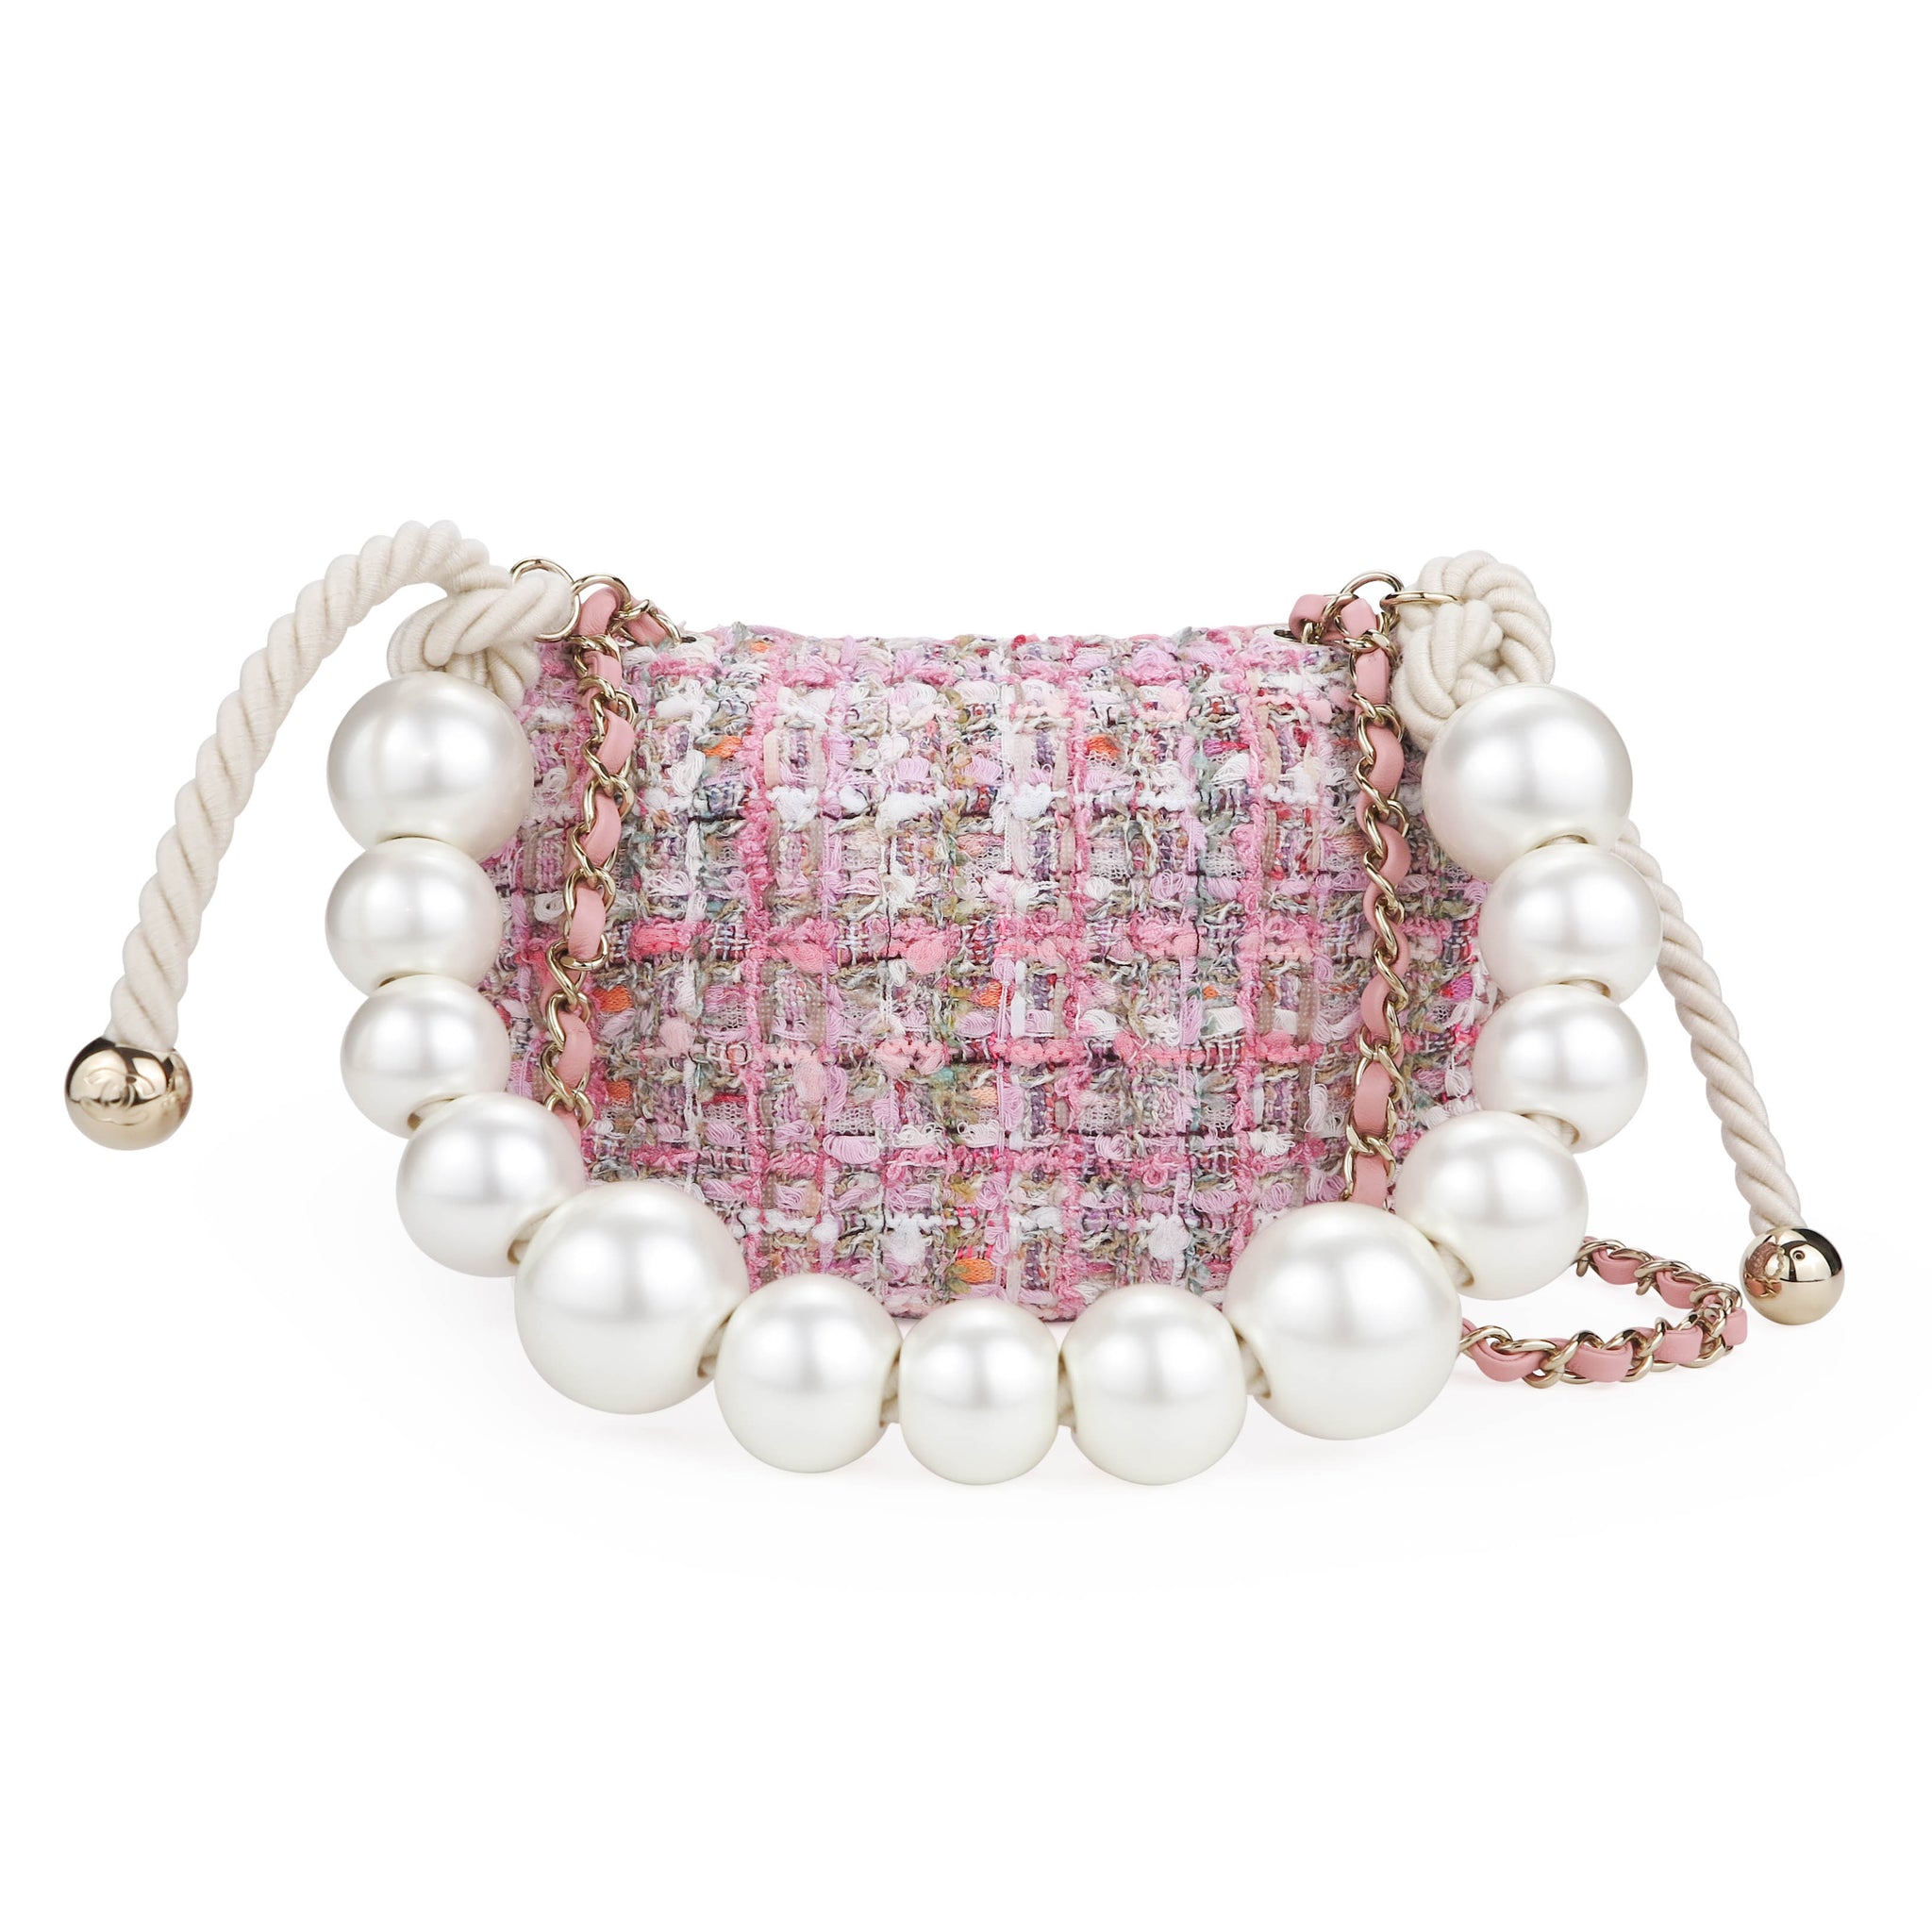 Chanel Tweed Flap Bag with Pearl Detail  Janet Mandell